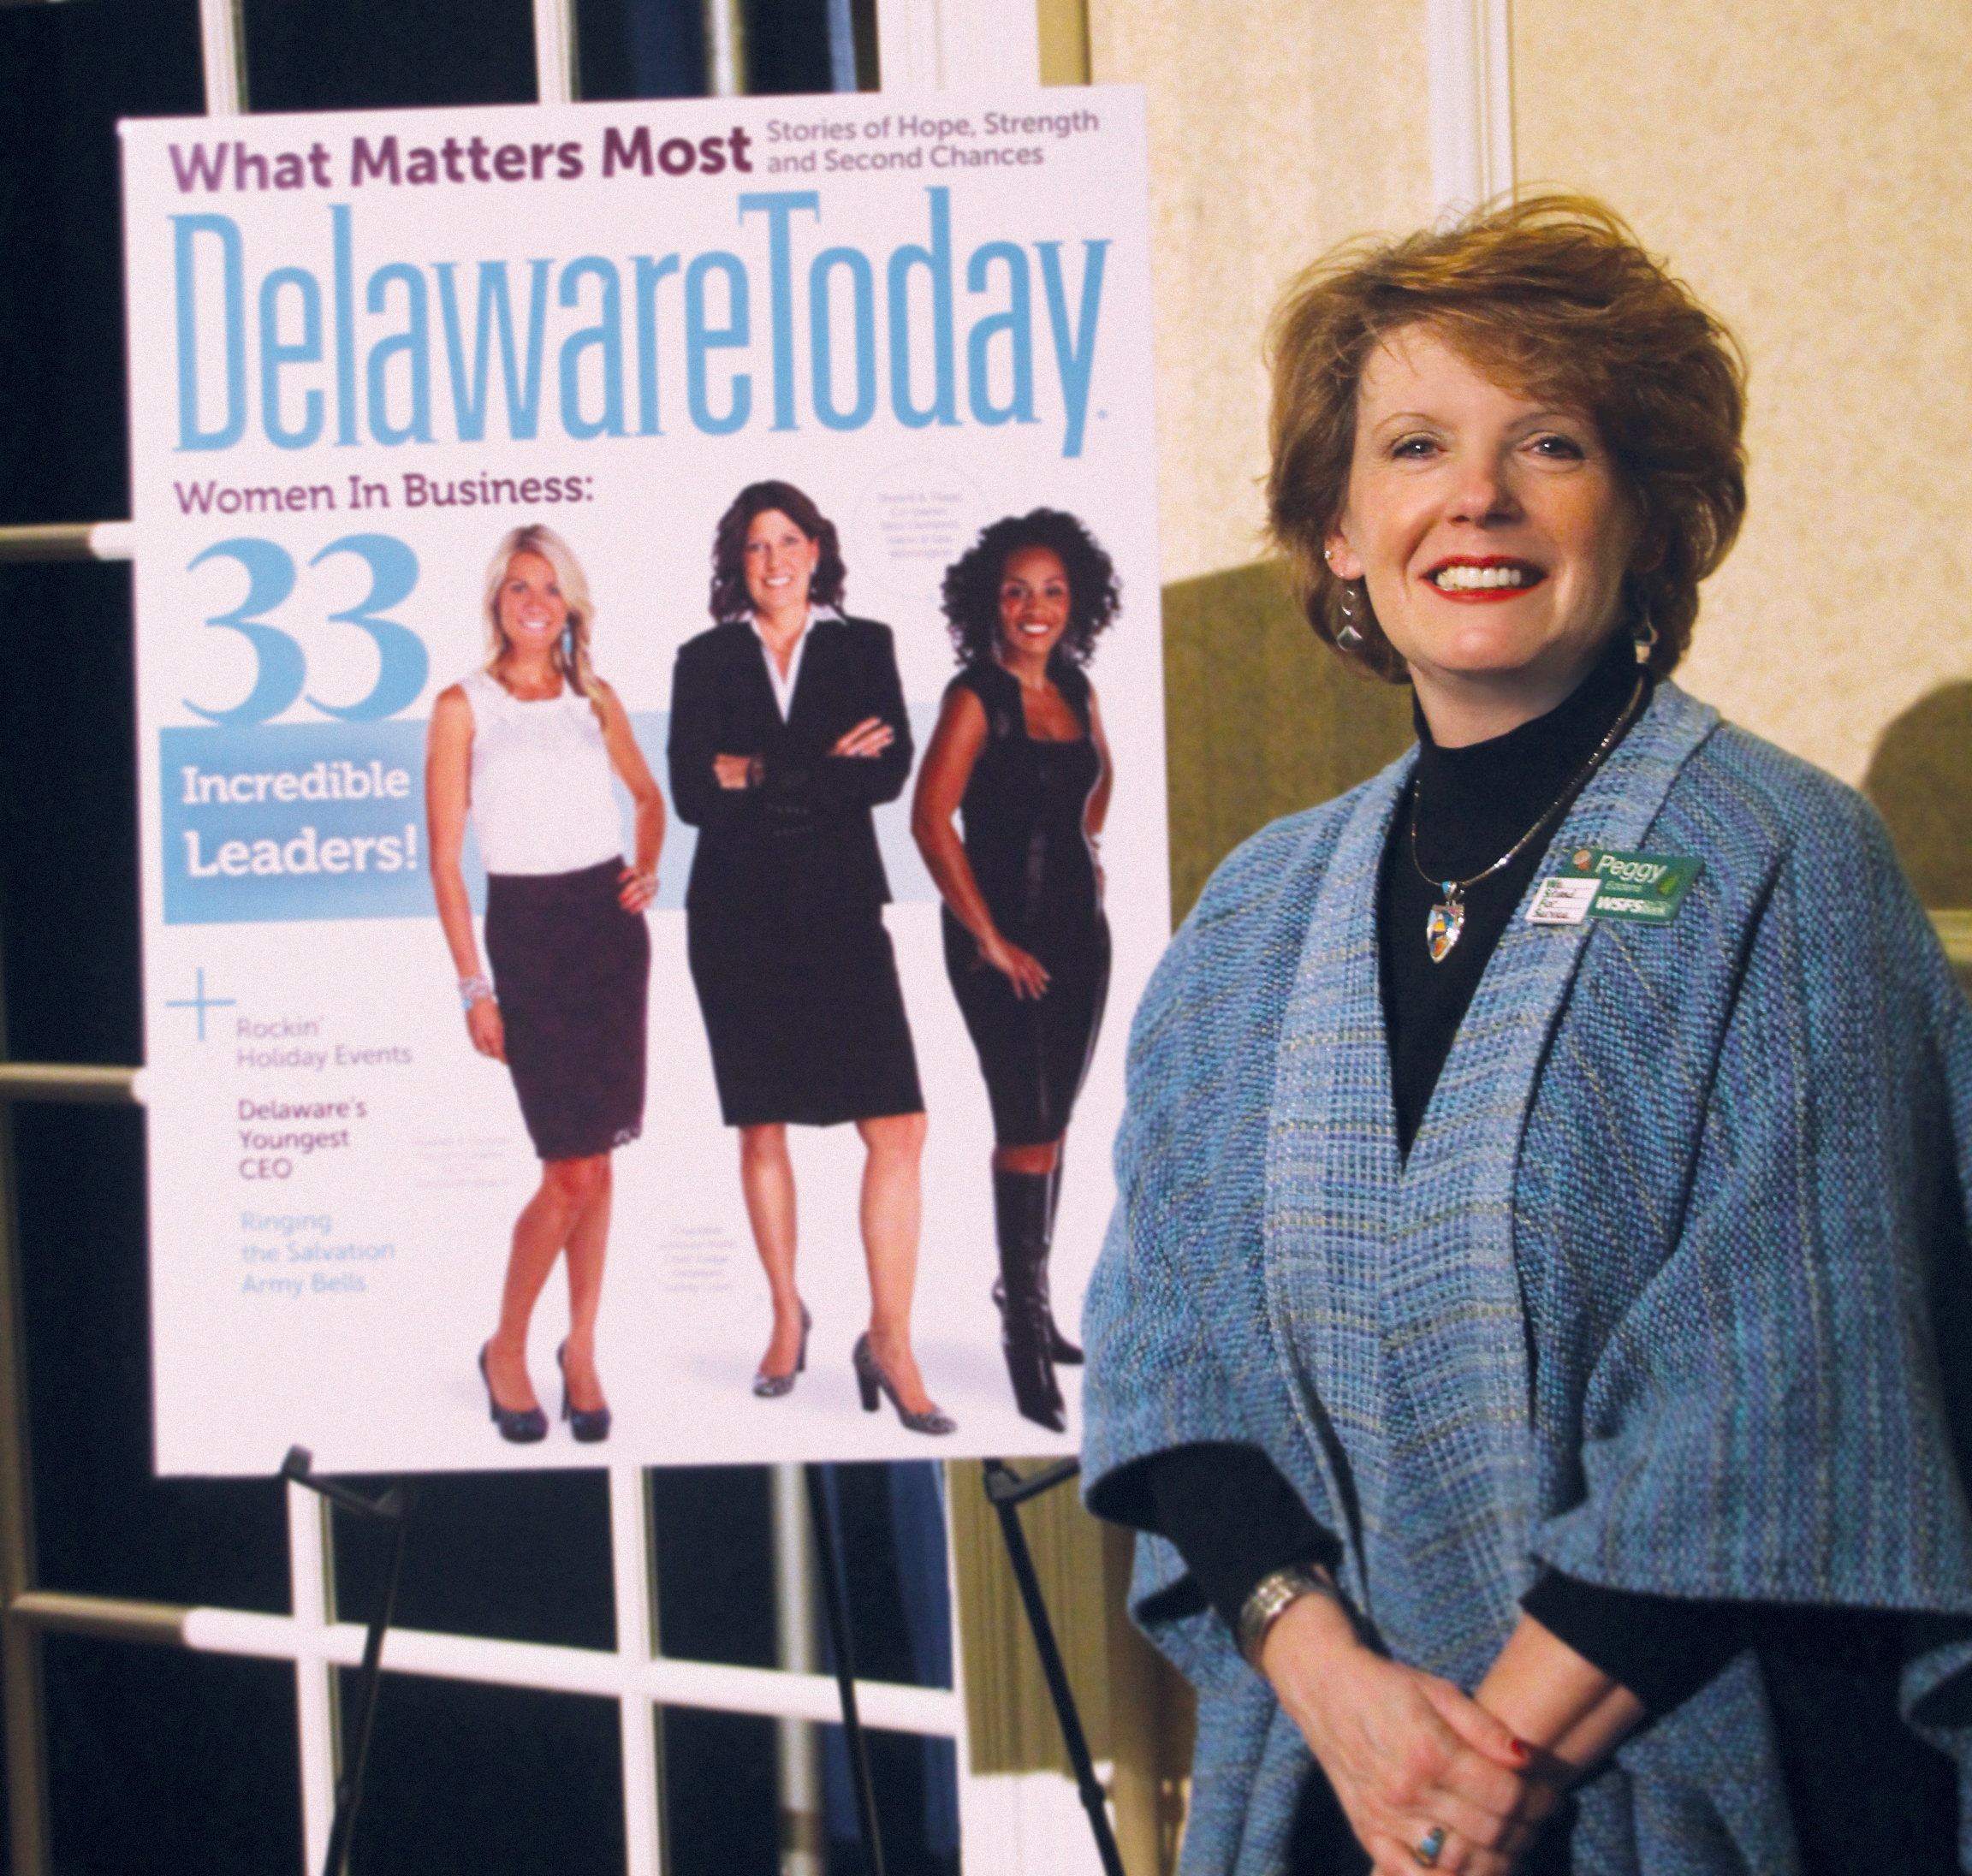 WITH THE "WOMEN IN BUSINESS" AWARD FROM DELAWARE TODAY MAGAZINE